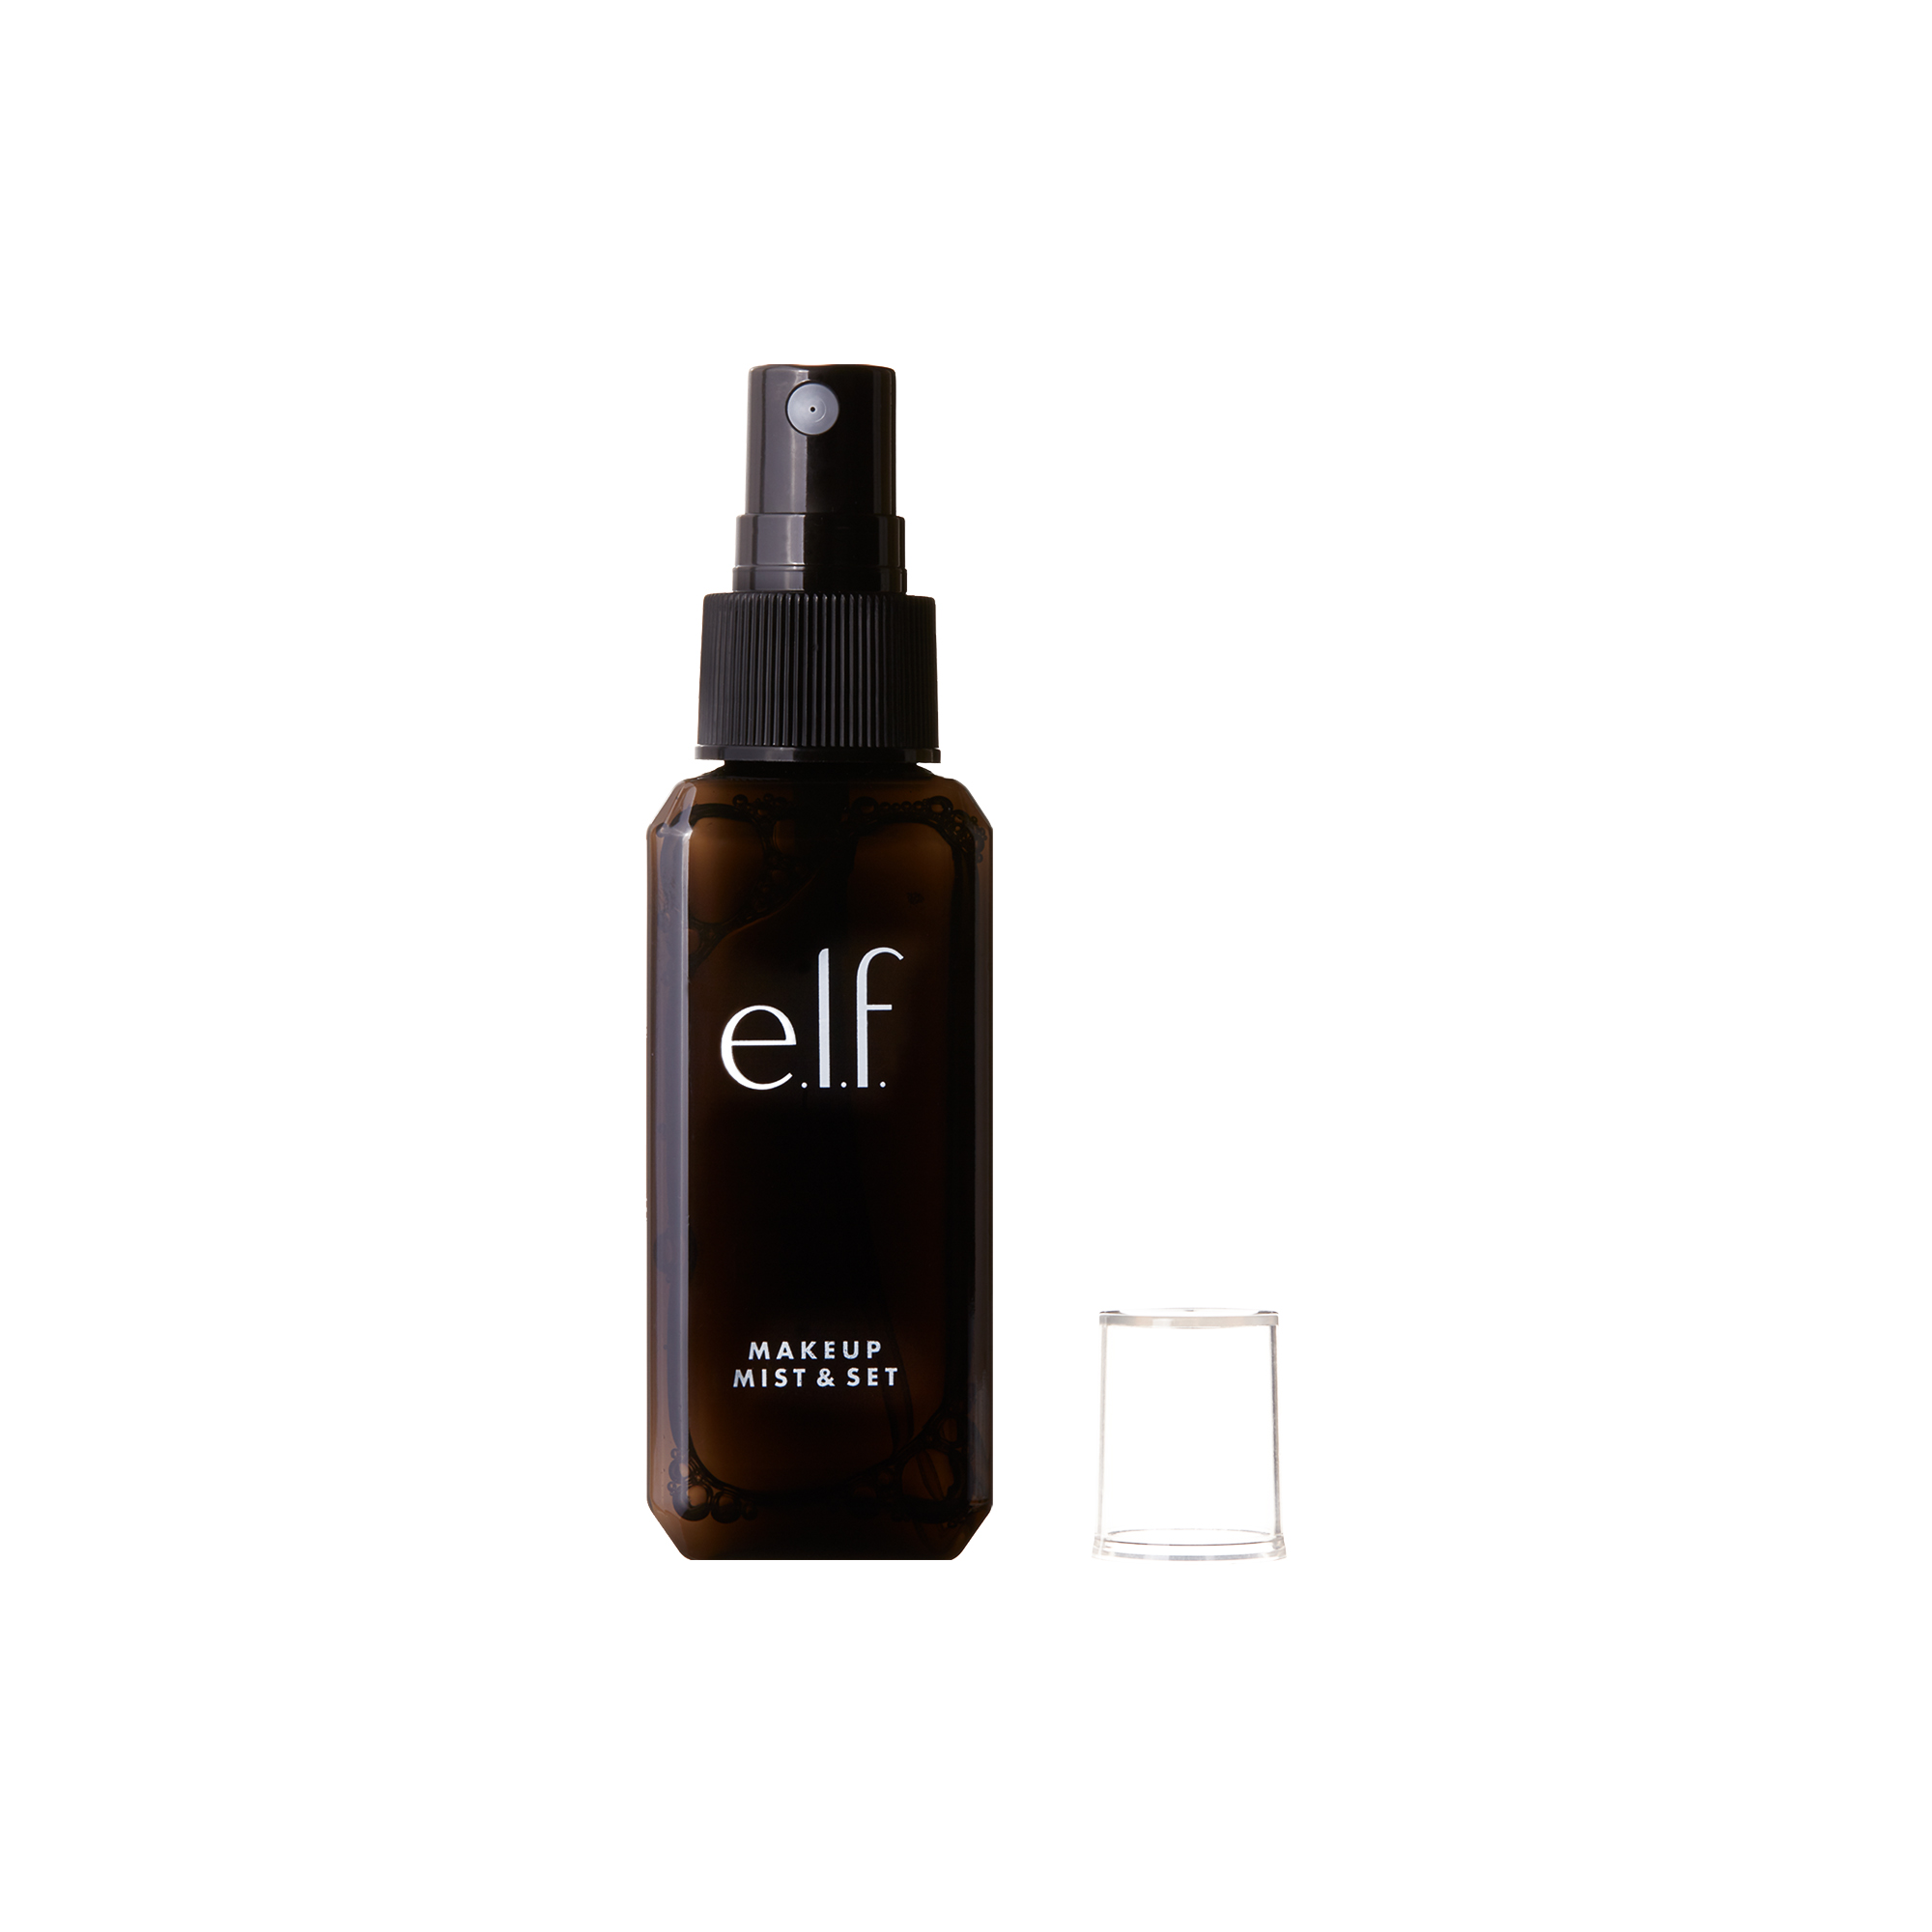 Makeup Mist and Set - Clear by e.l.f. for Women - 2.02 oz Mist - image 1 of 4